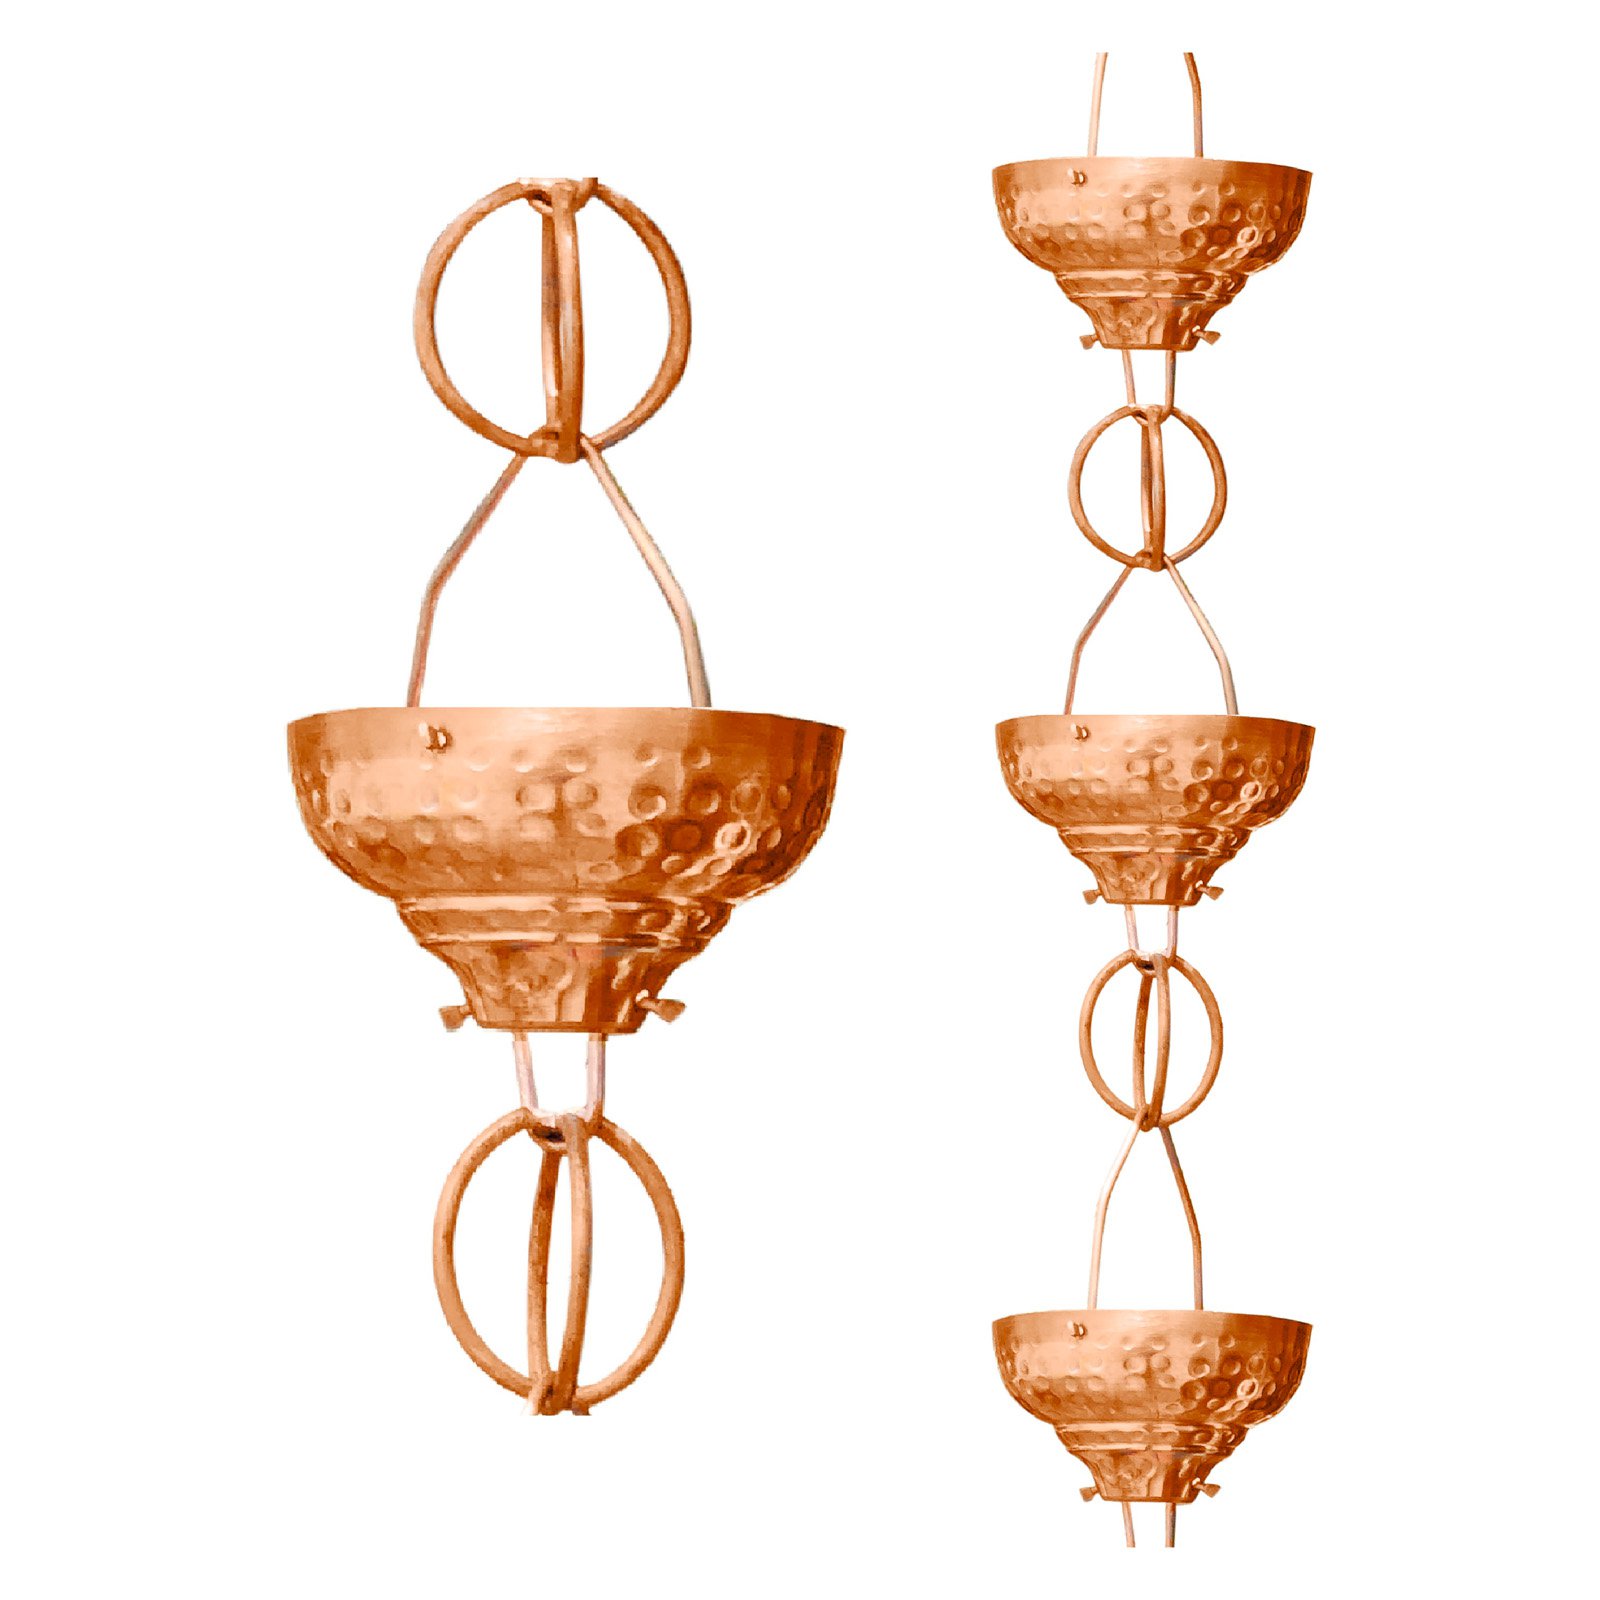 Monarch Rain Chains Pure Copper Eastern Hammered Cup Rain Chain Replacement Downspout for Gutters, 8-1/2 Feet Length - image 1 of 3